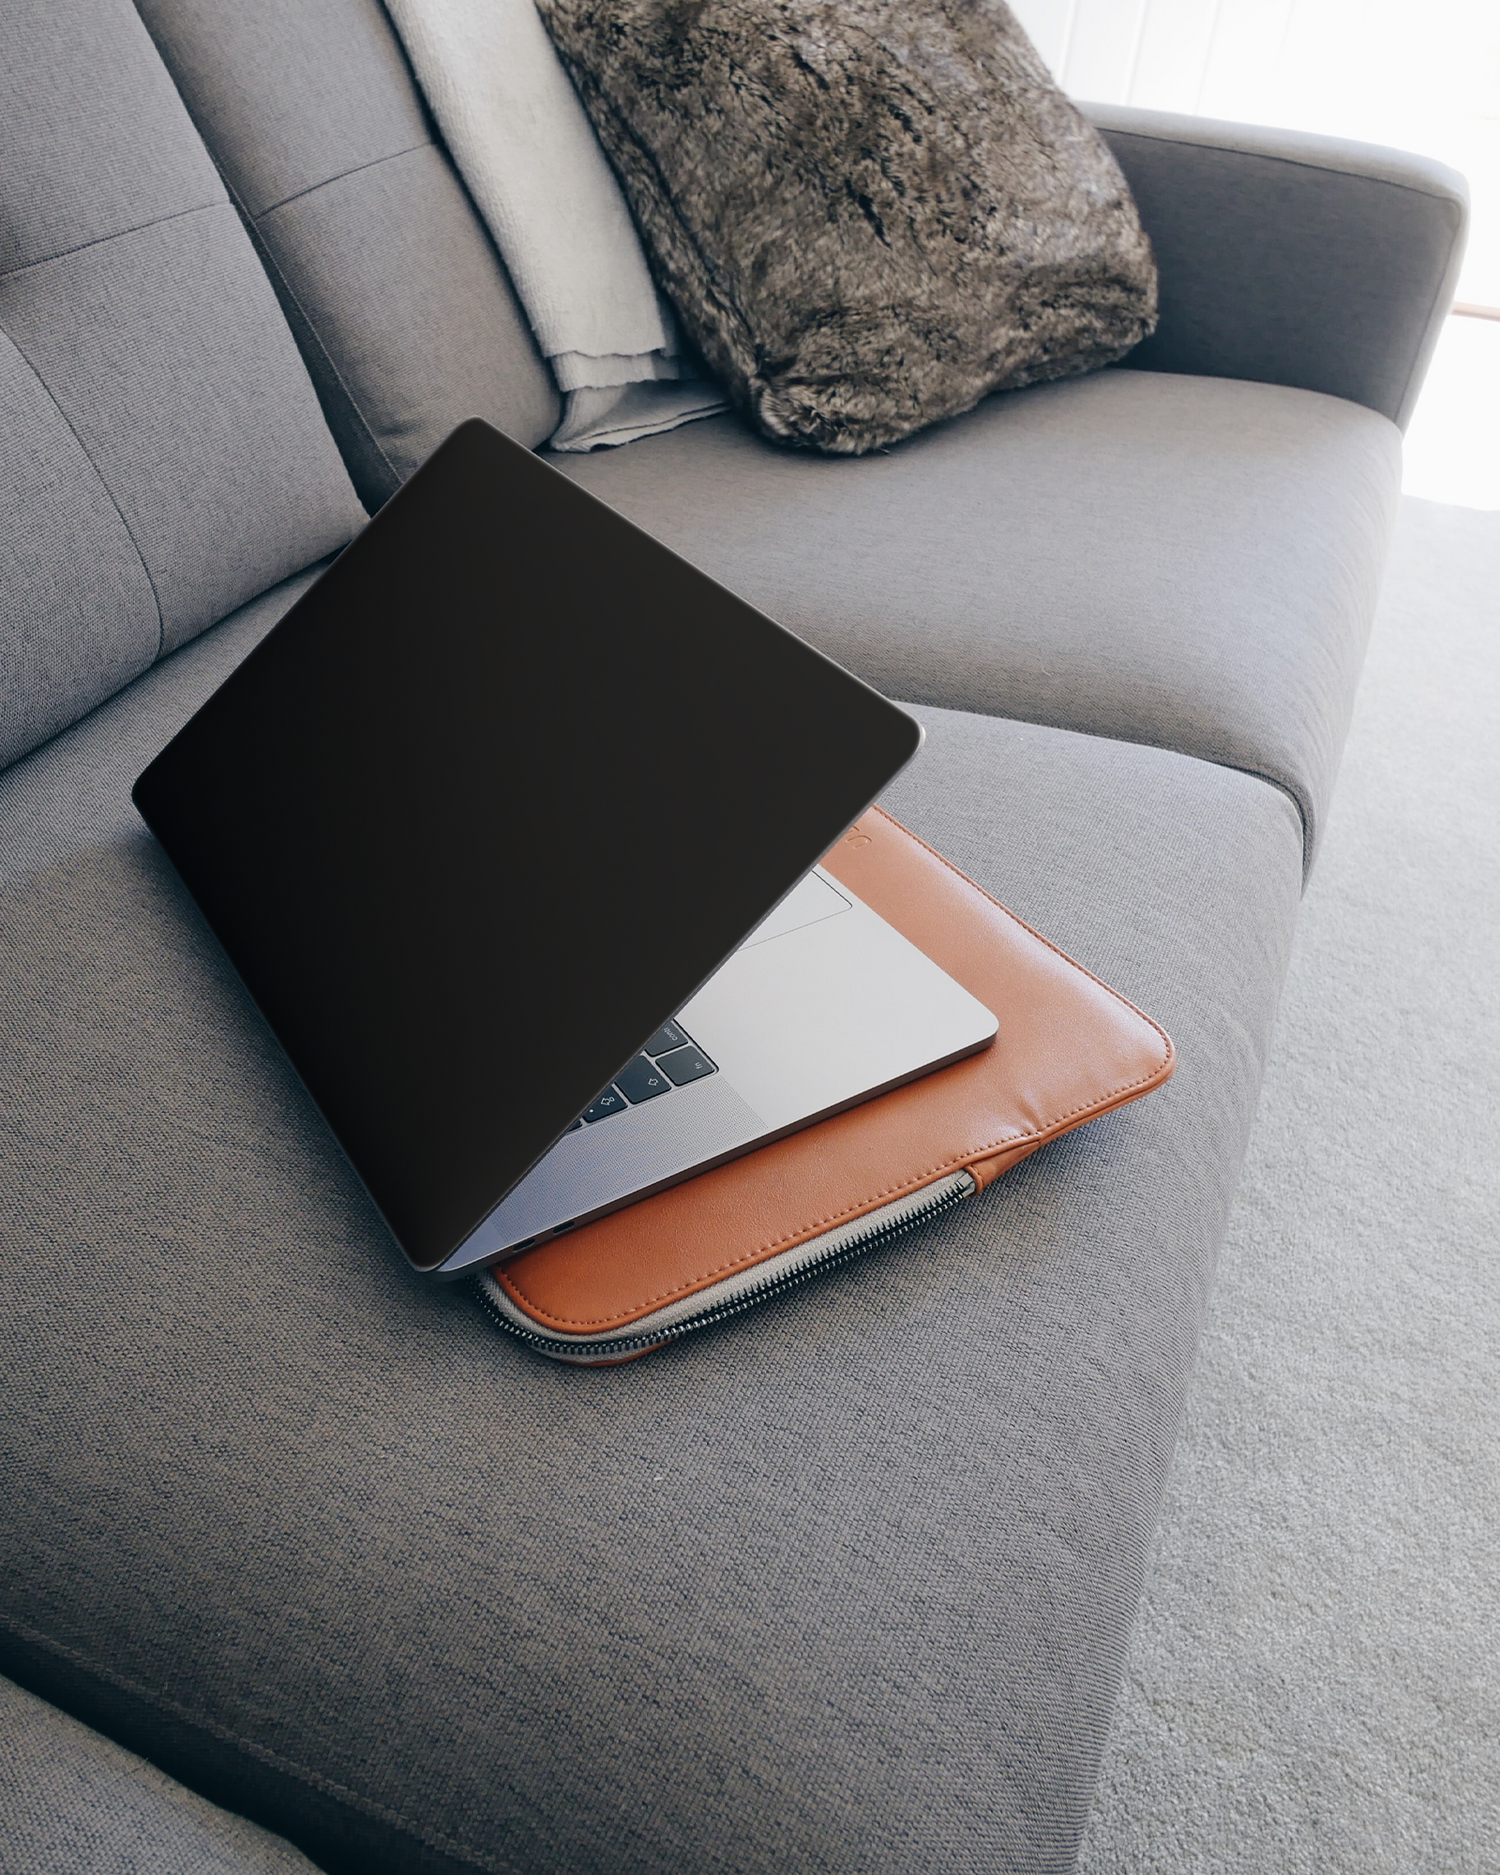 BLACK Laptop Skin for 15 inch Apple MacBooks on a couch